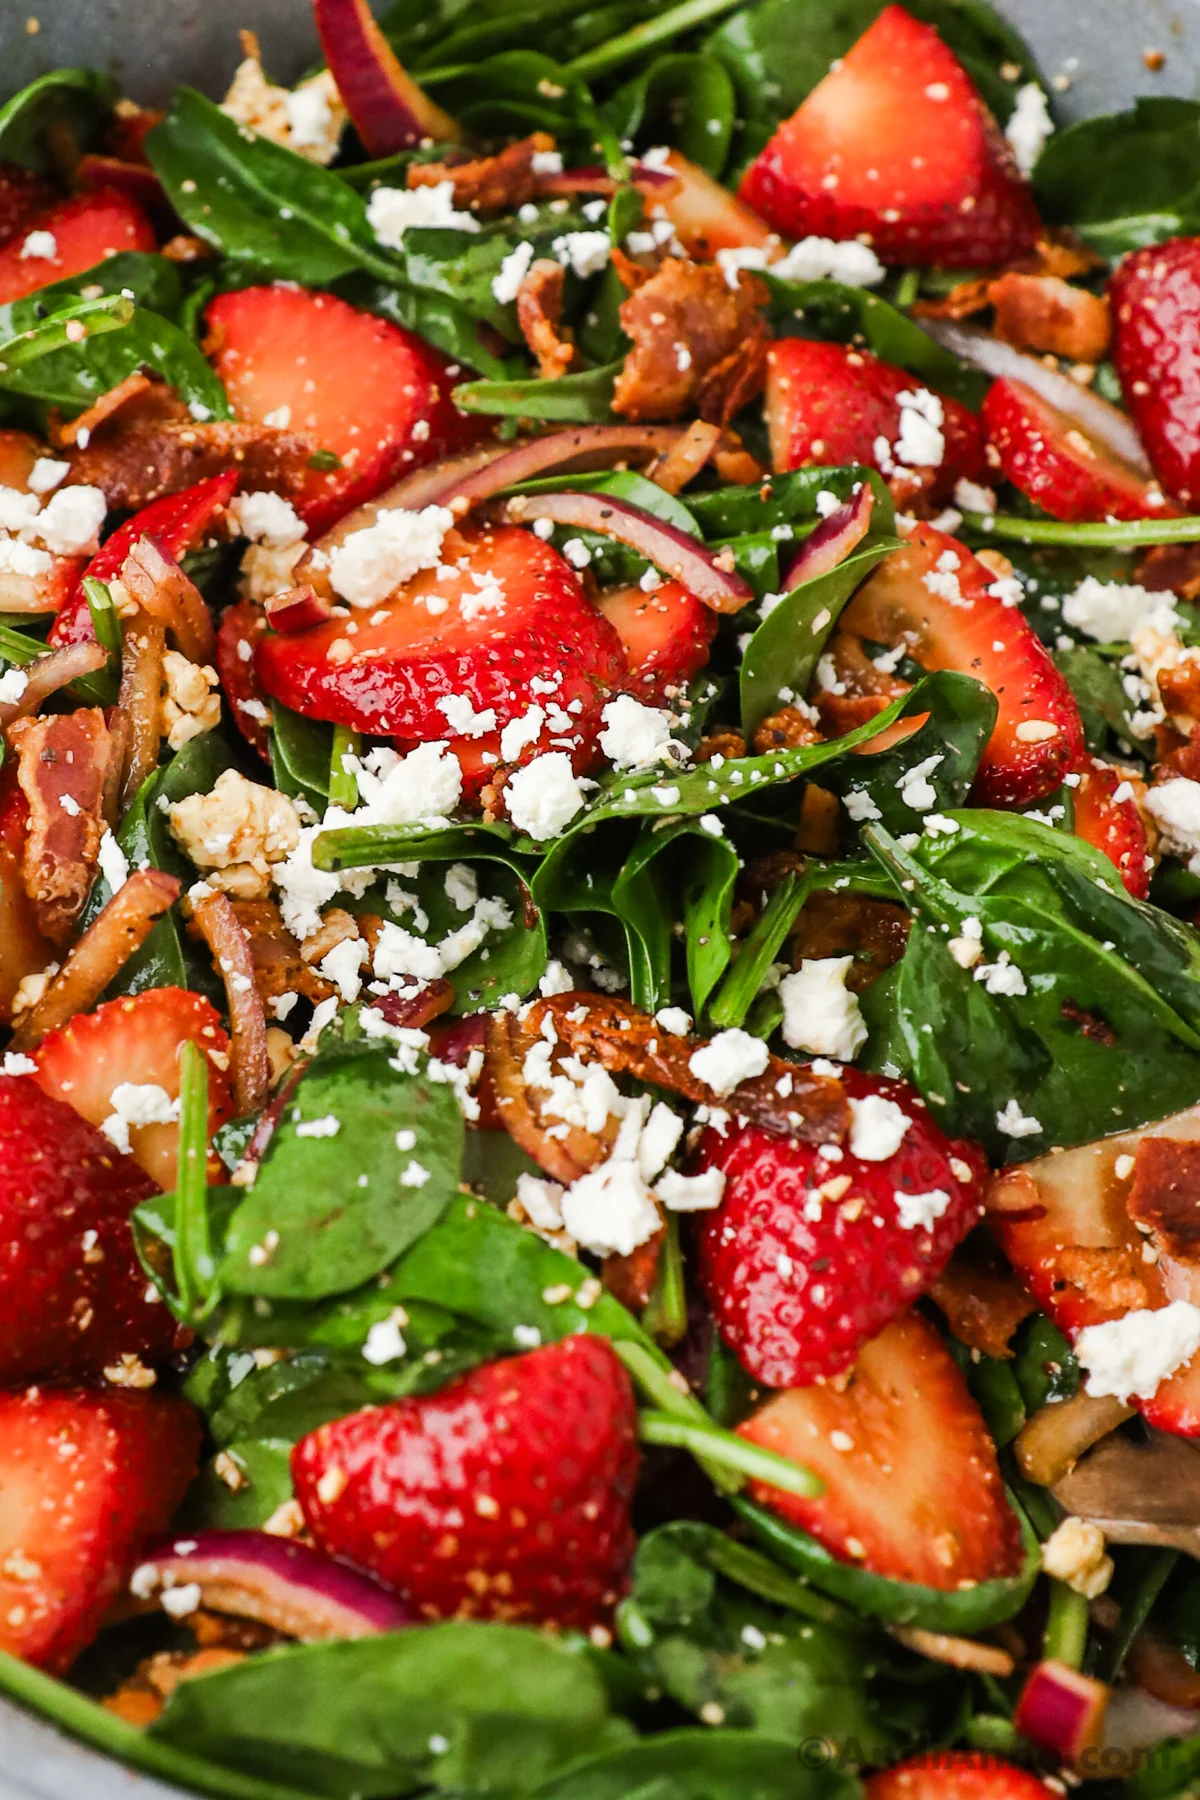 Sliced strawberries, spinach, feta and bacon in a salad.